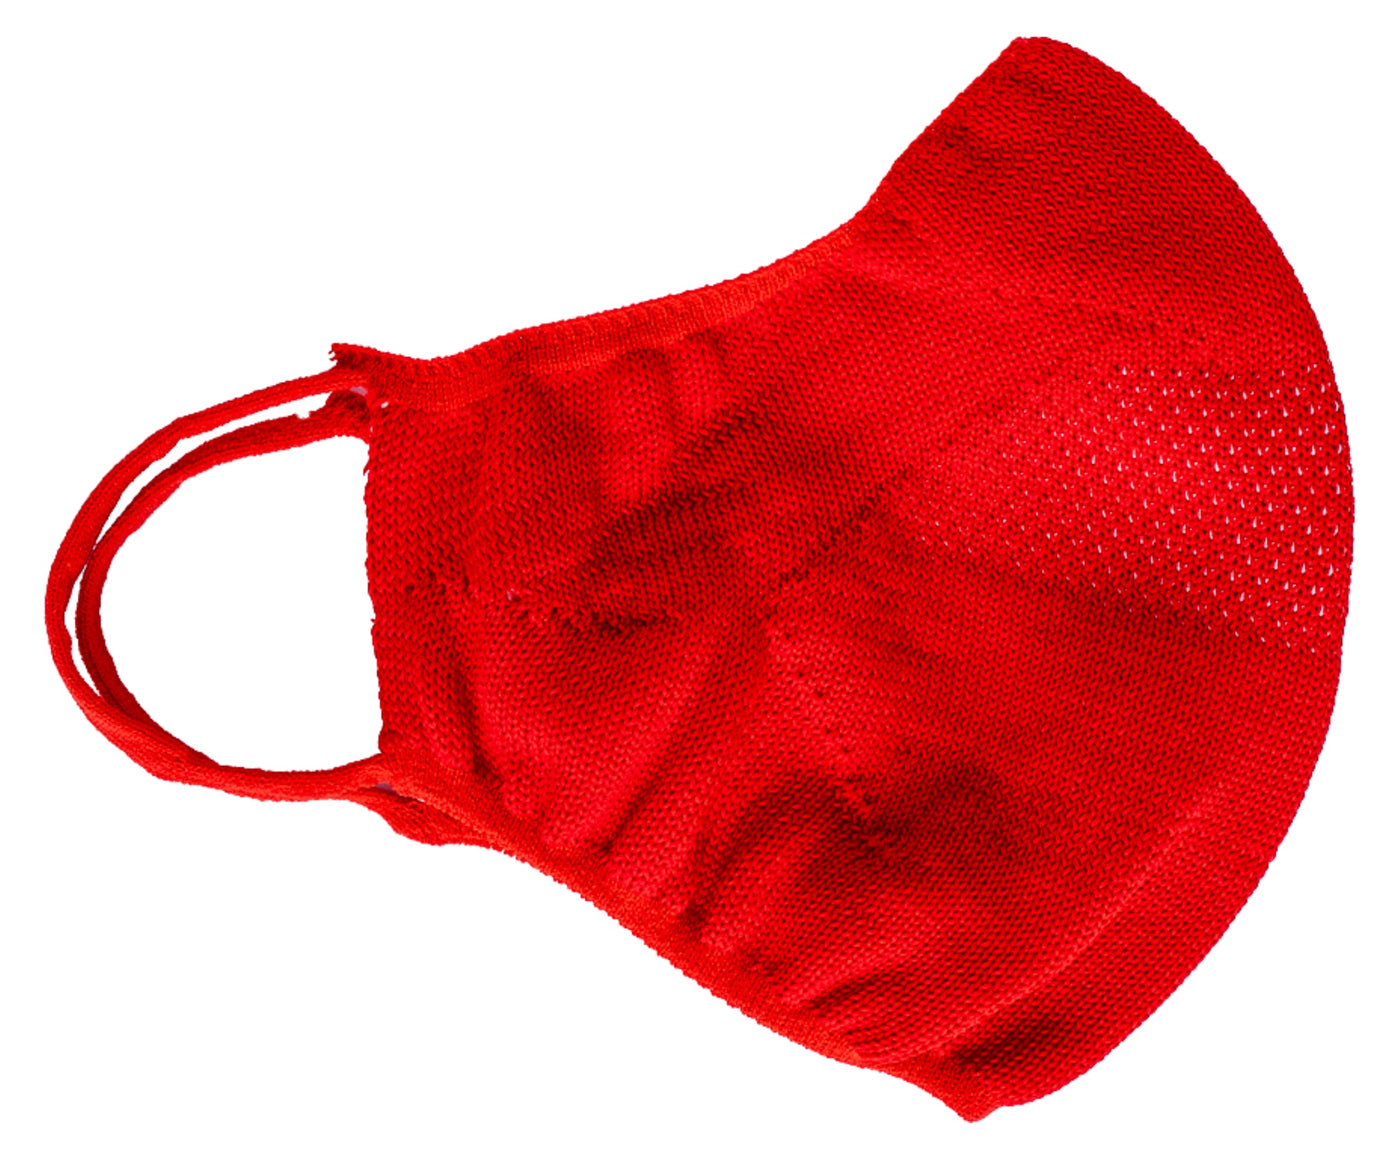 Face Mask - Red